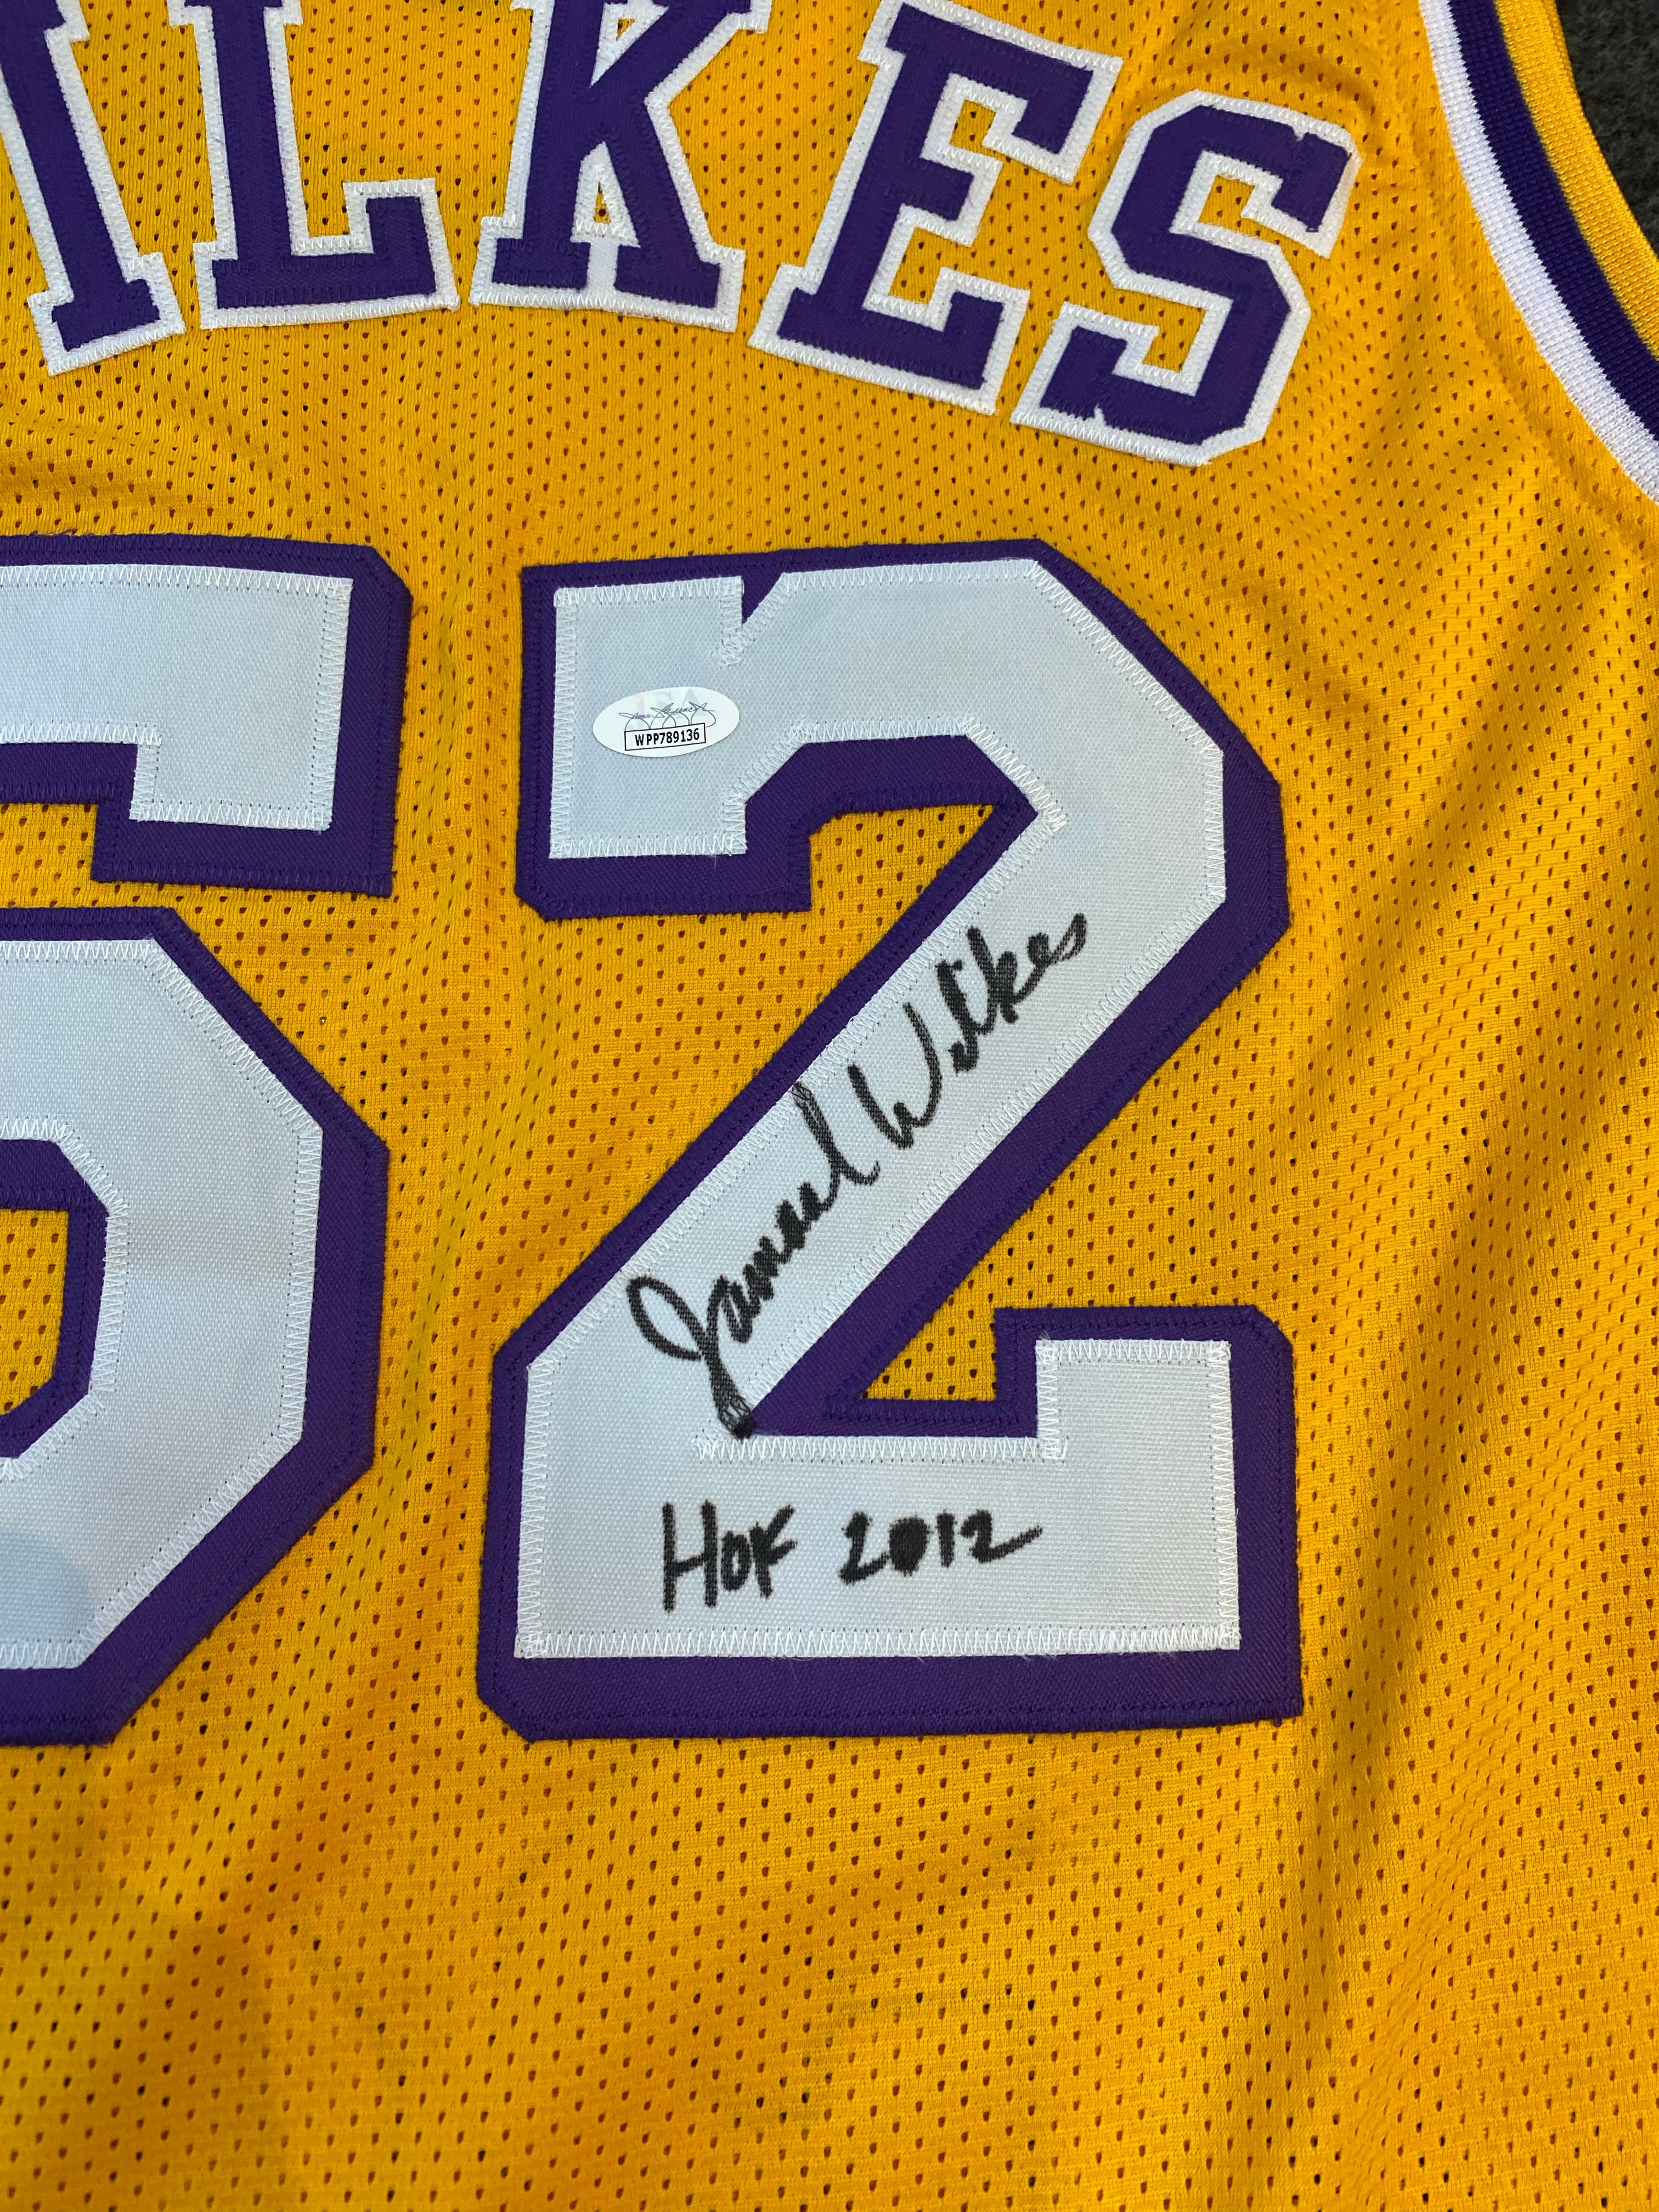 Jamaal Wilkes Signed Los Angeles Lakers Purple Home Picture Jersey (JS –